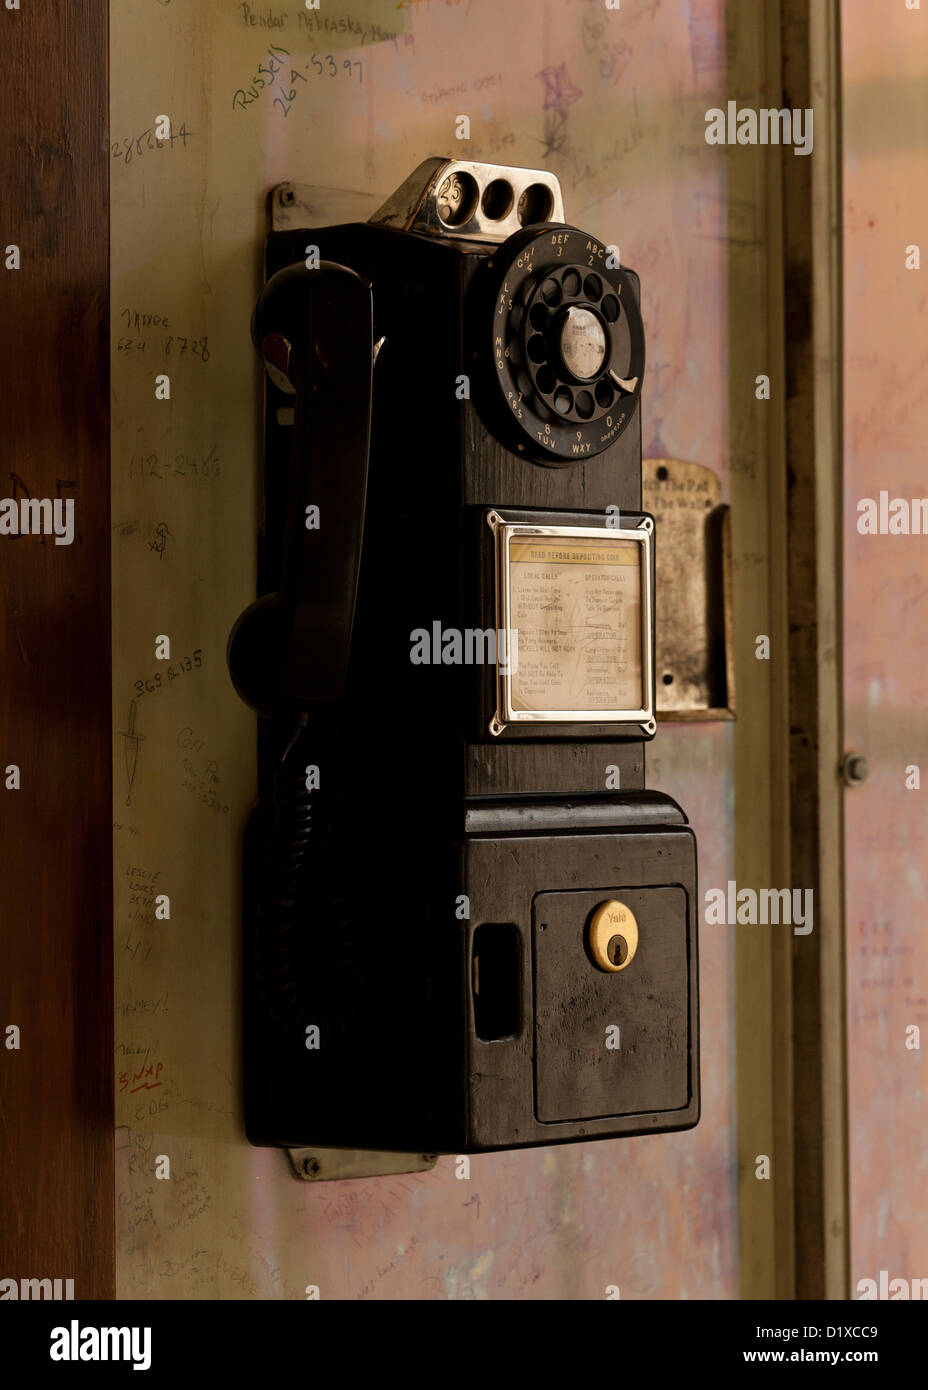 Vintage rotary dial pay phone on wall Stock Photo